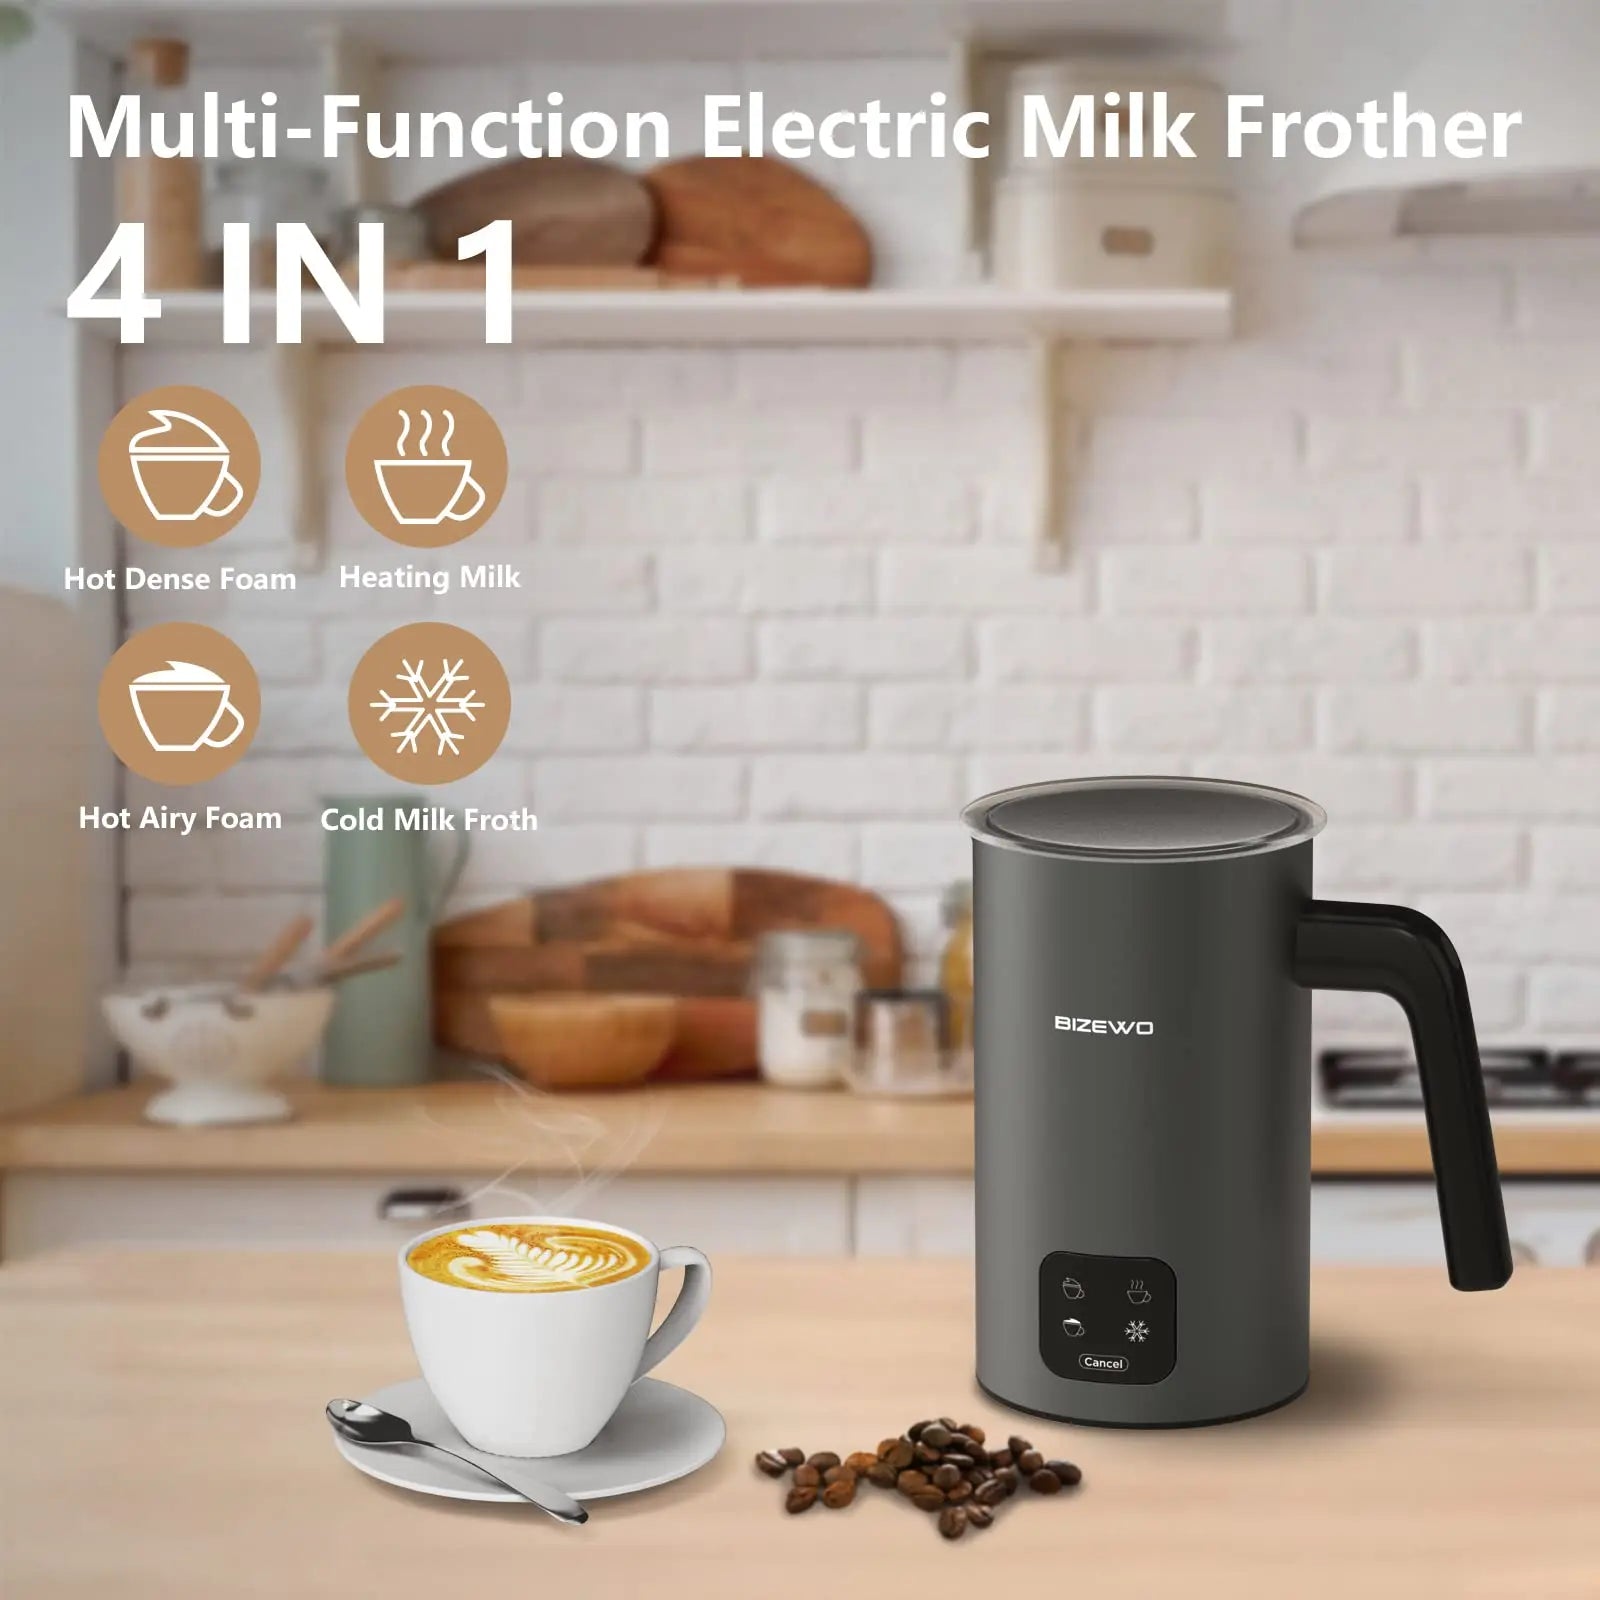 Milk frother - Maintenance products